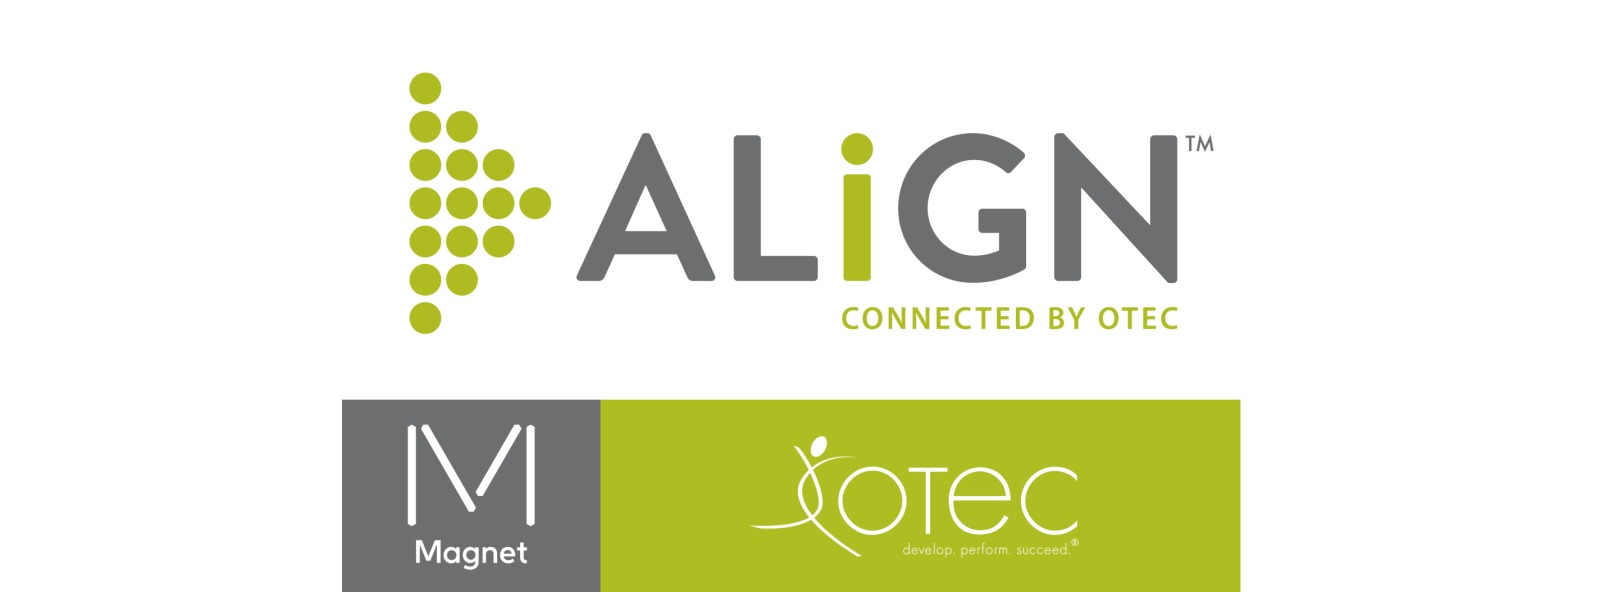 ALiGN for Newcomer Talent